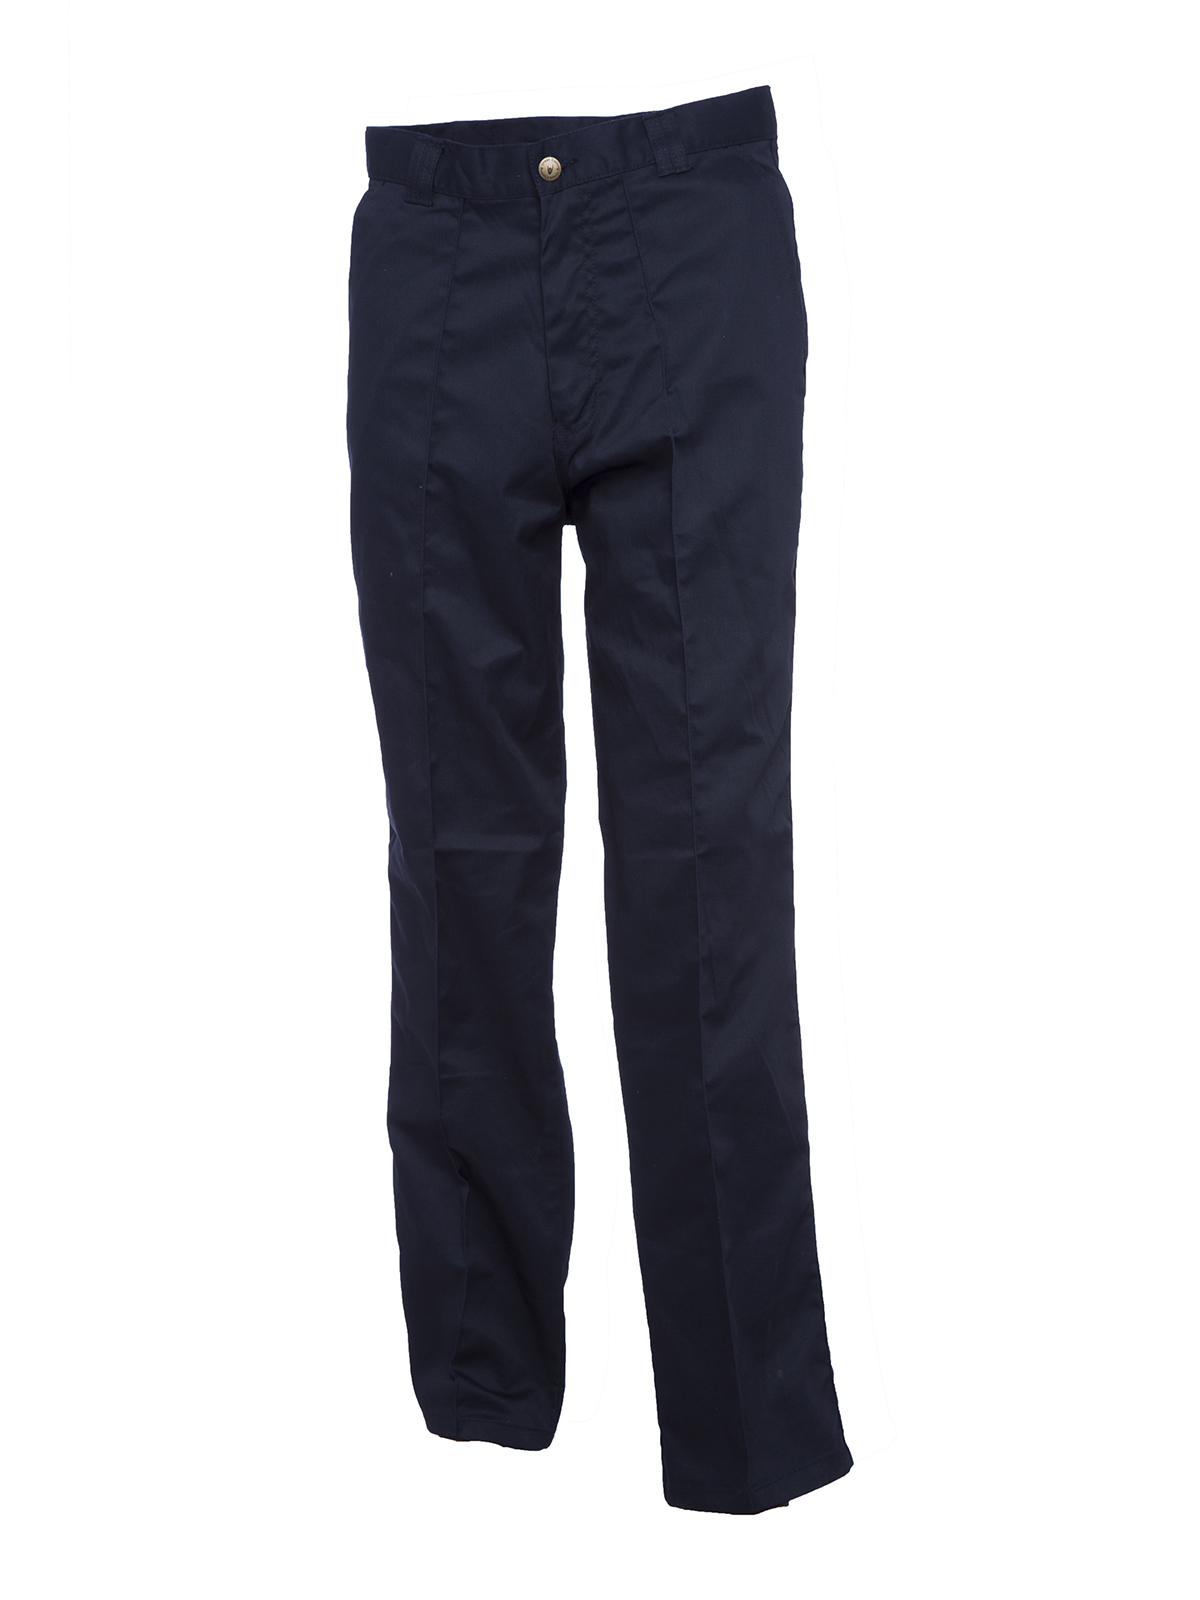 Workwear Trousers, Navy Blue - 46R